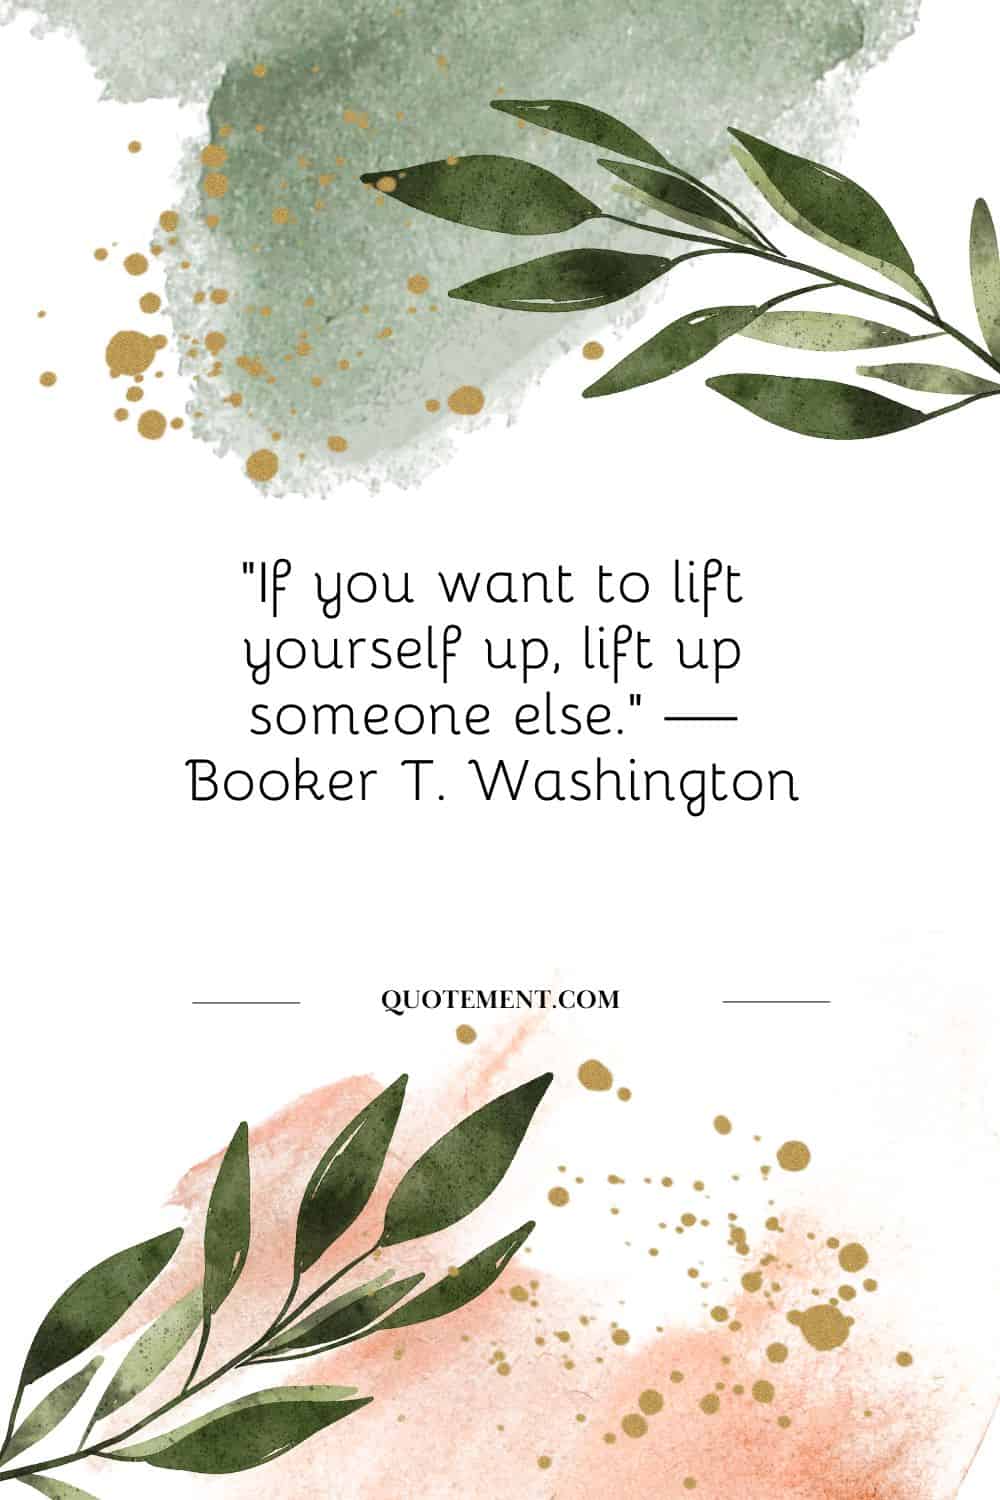 “If you want to lift yourself up, lift up someone else.” — Booker T. Washington